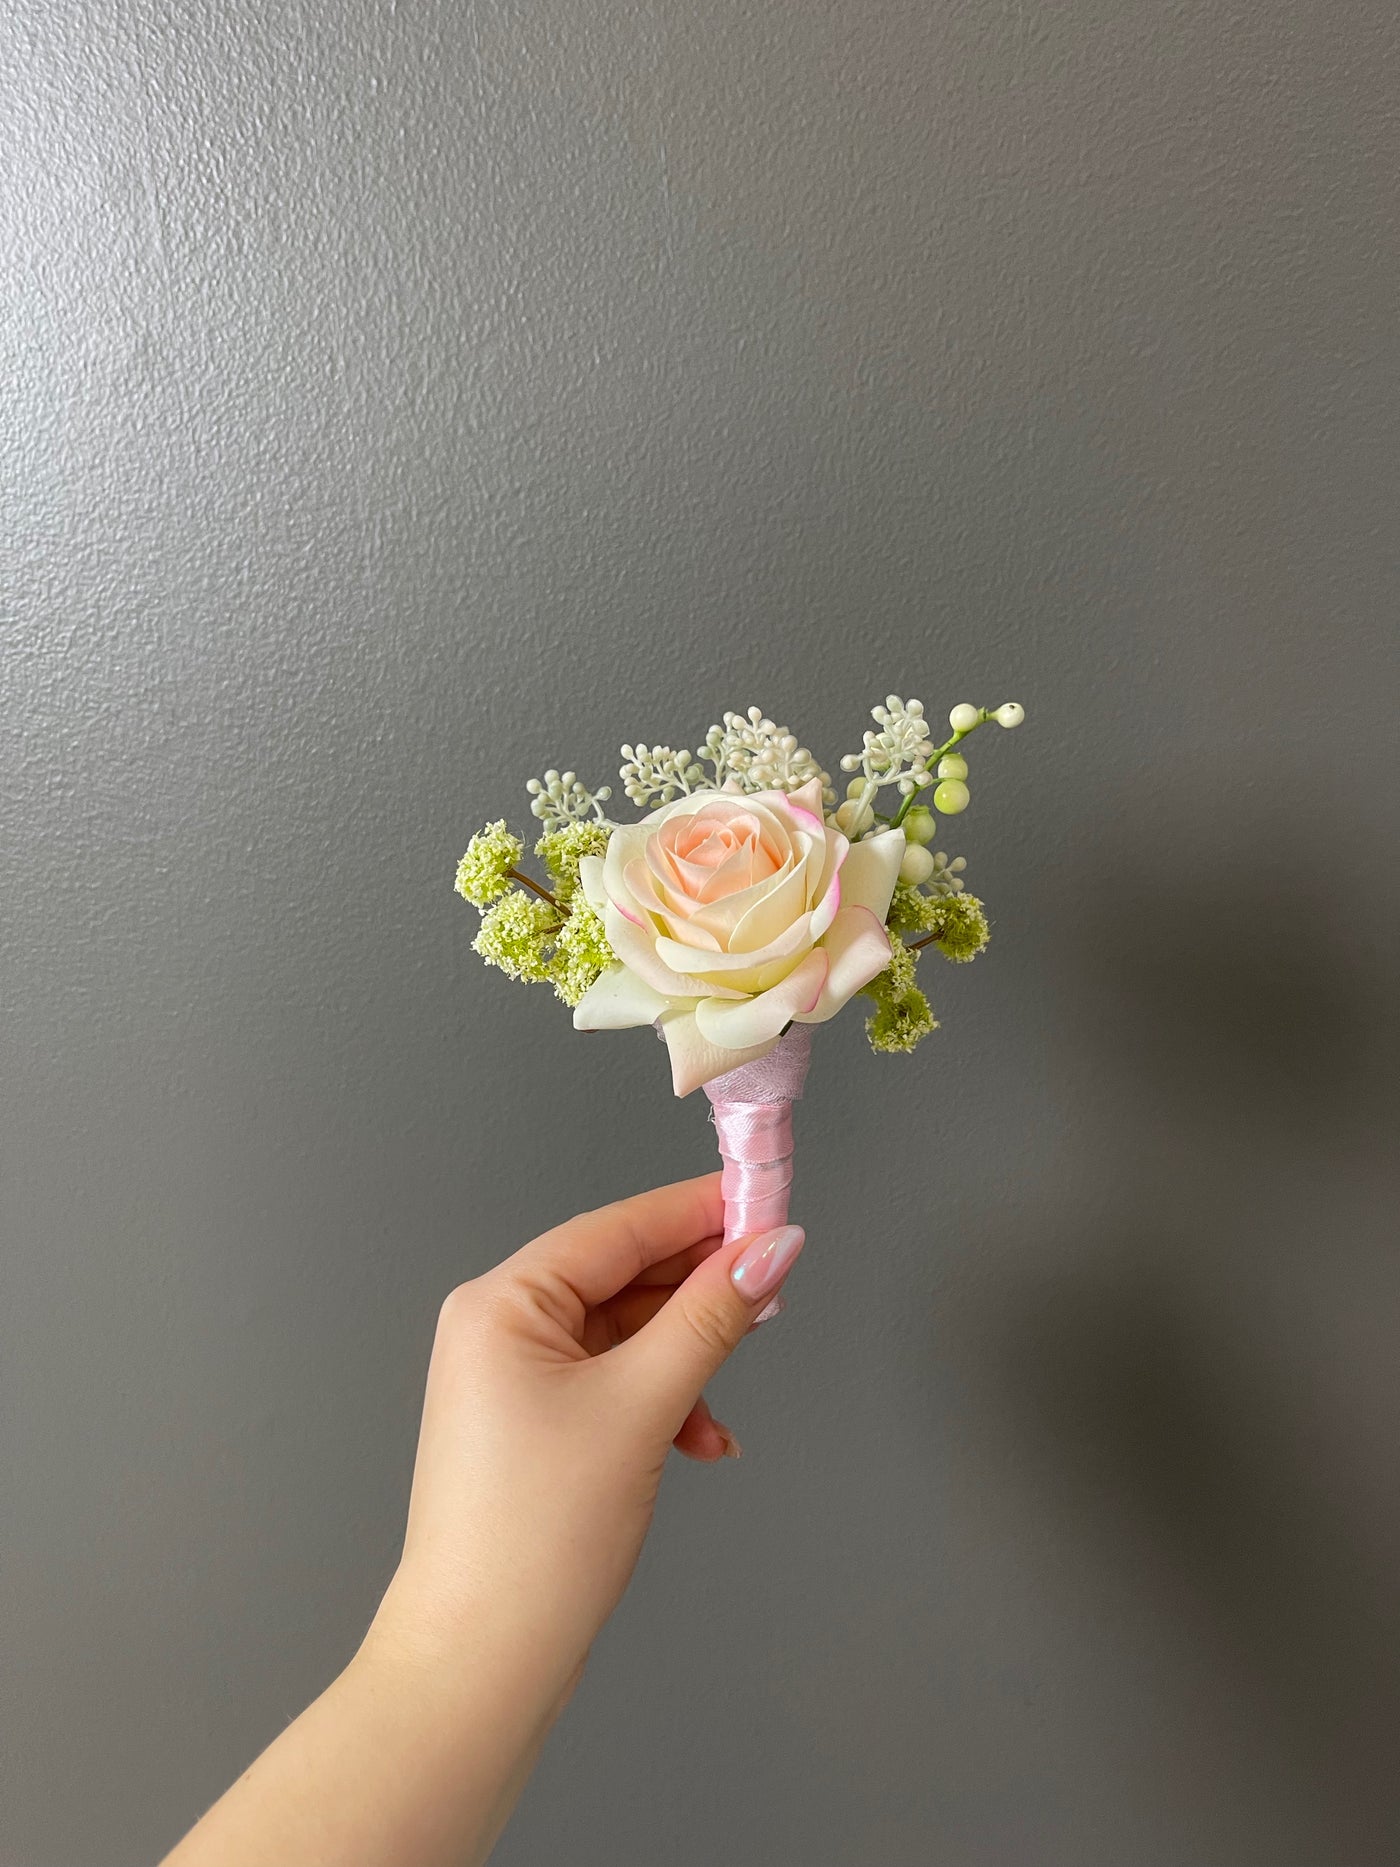 This delicate 6" boutonniere features a cream and light pink rose, and various green foliage, secured with a soft pink satin ribbon. 